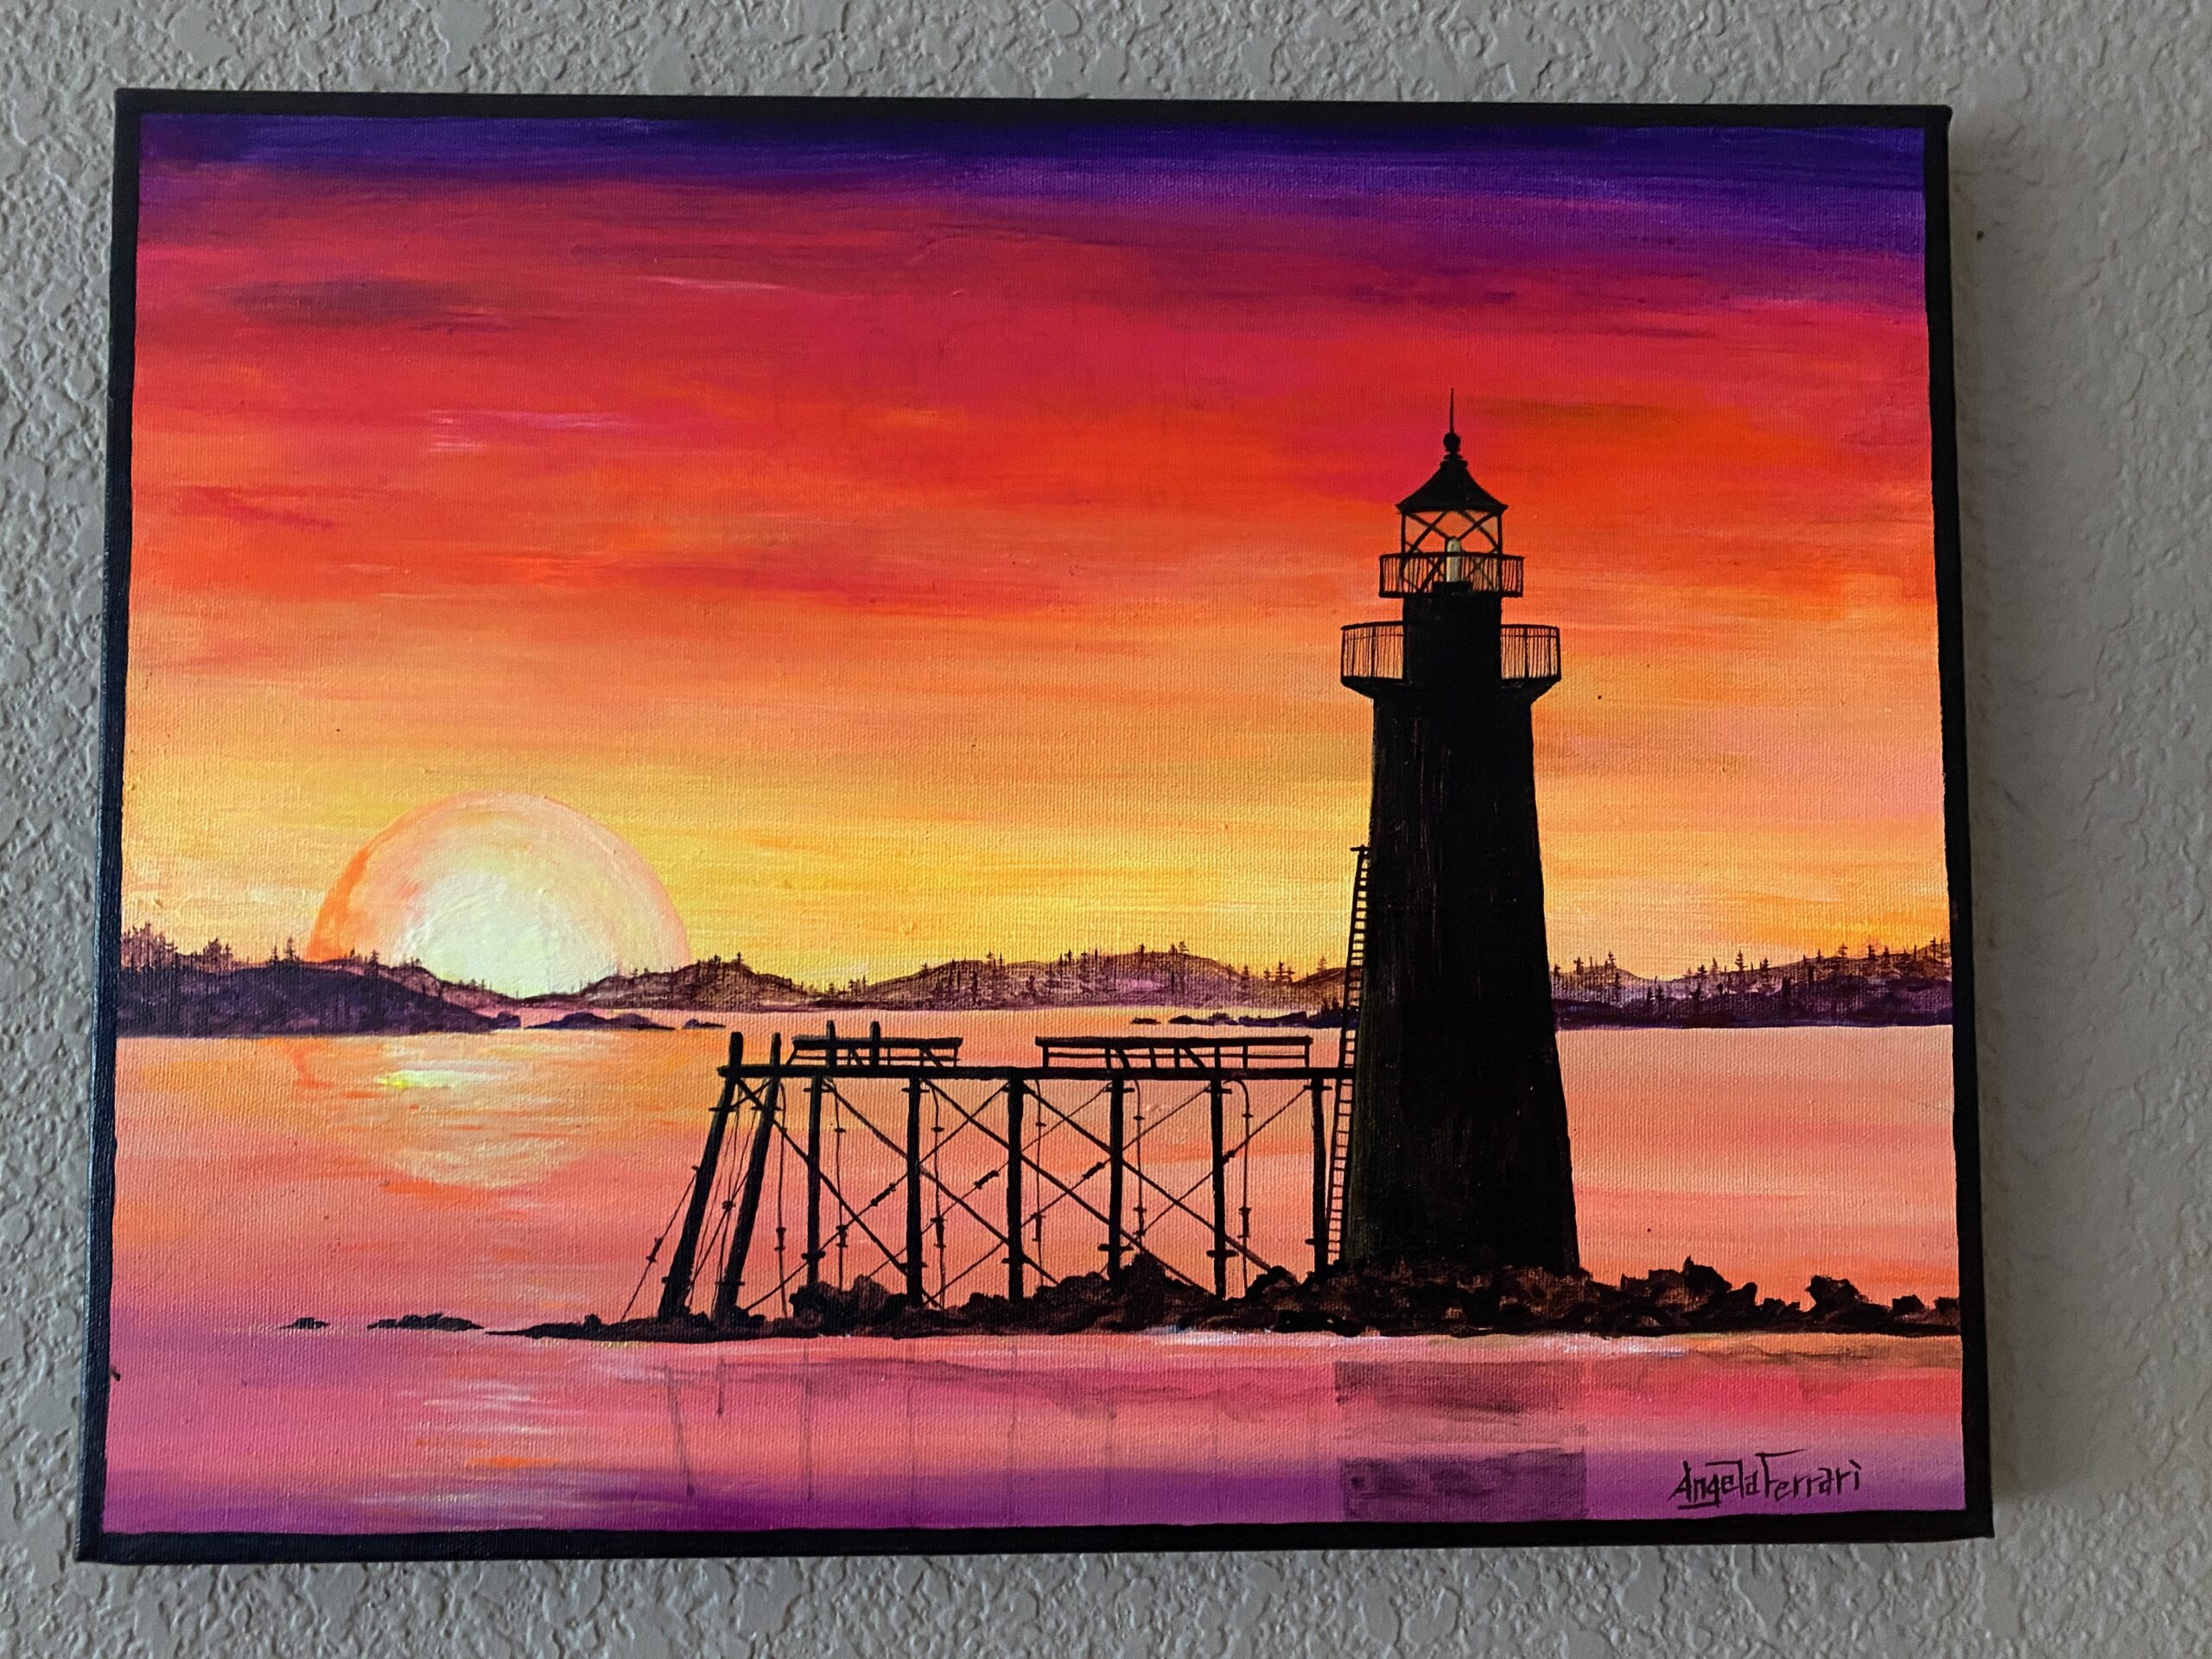 A painting of a sunset with the silhouette of a lighthouse in the foreground.